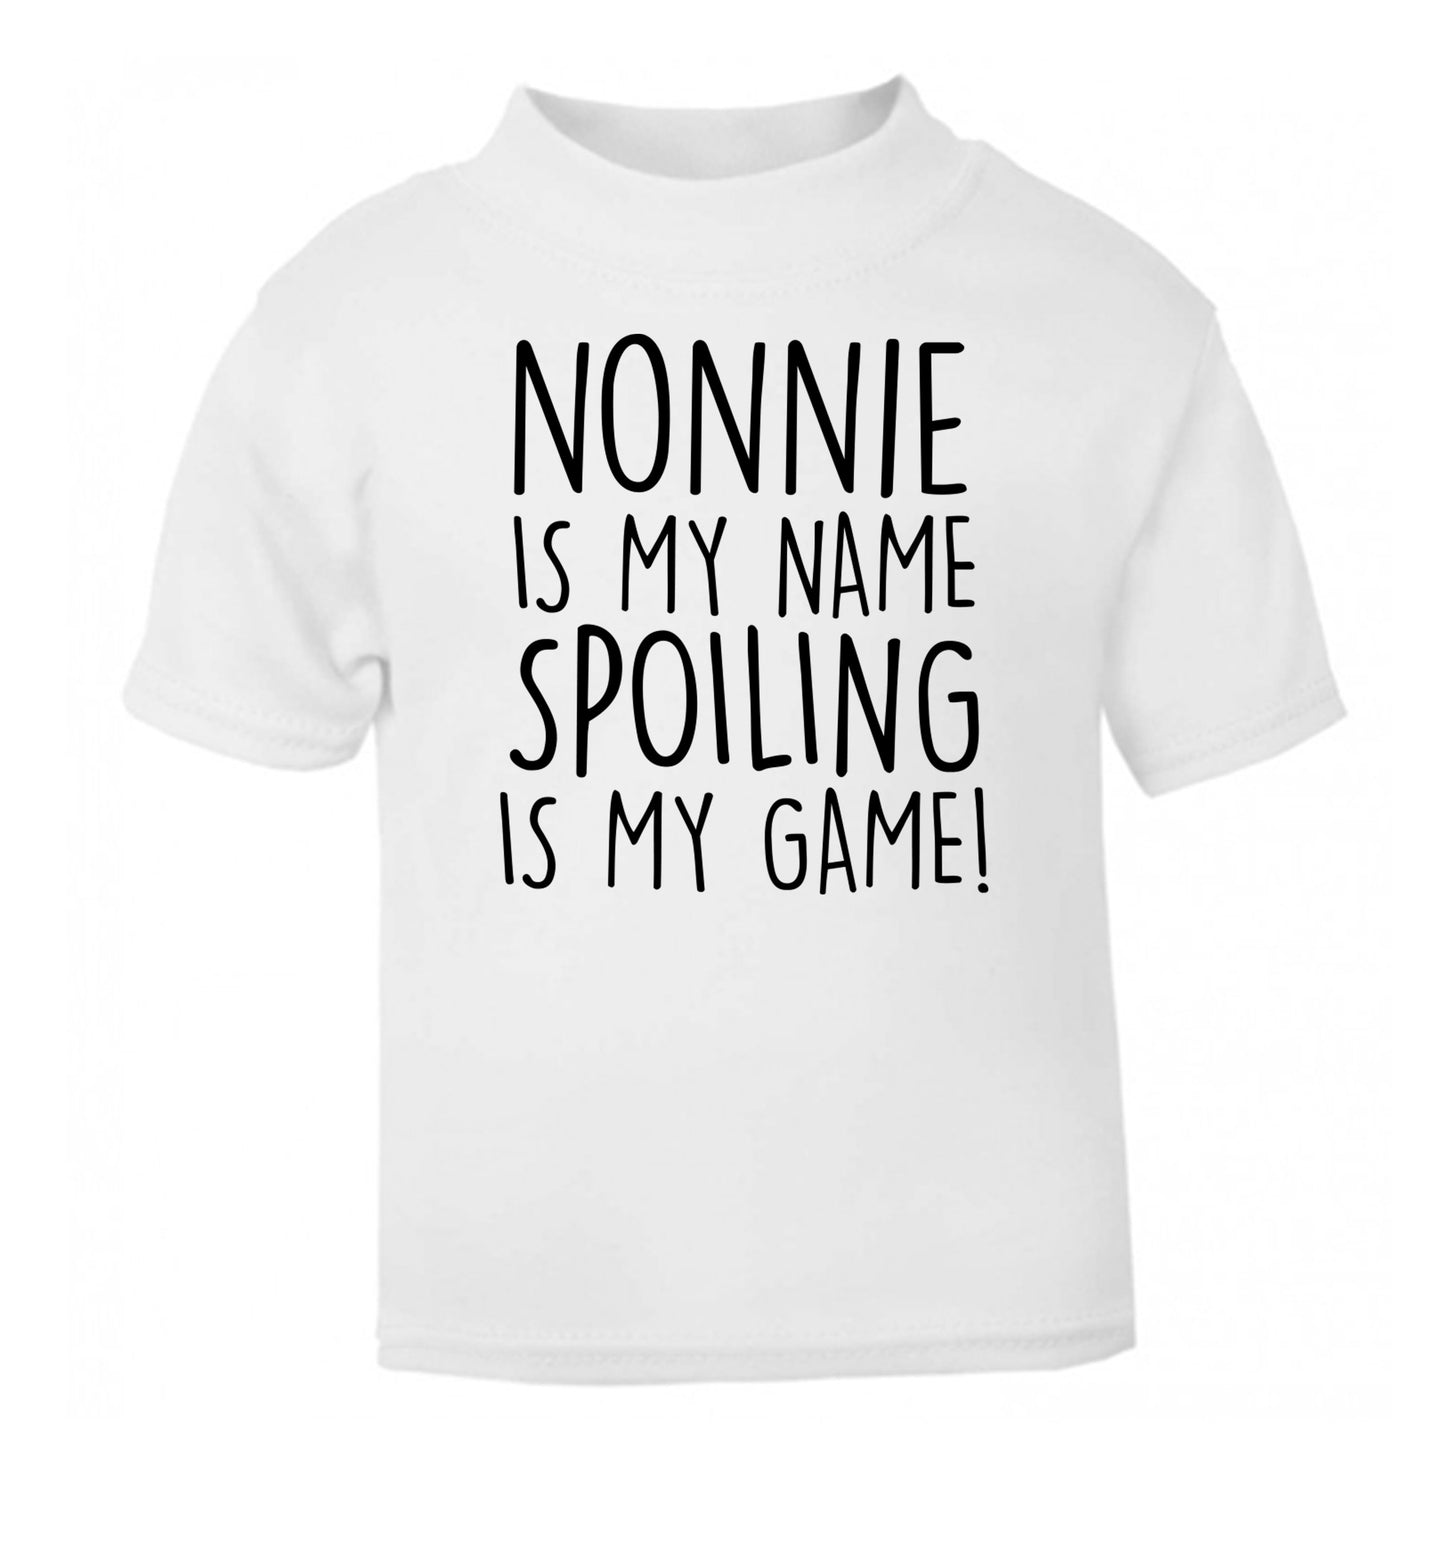 Nonnie is my name, spoiling is my game white Baby Toddler Tshirt 2 Years